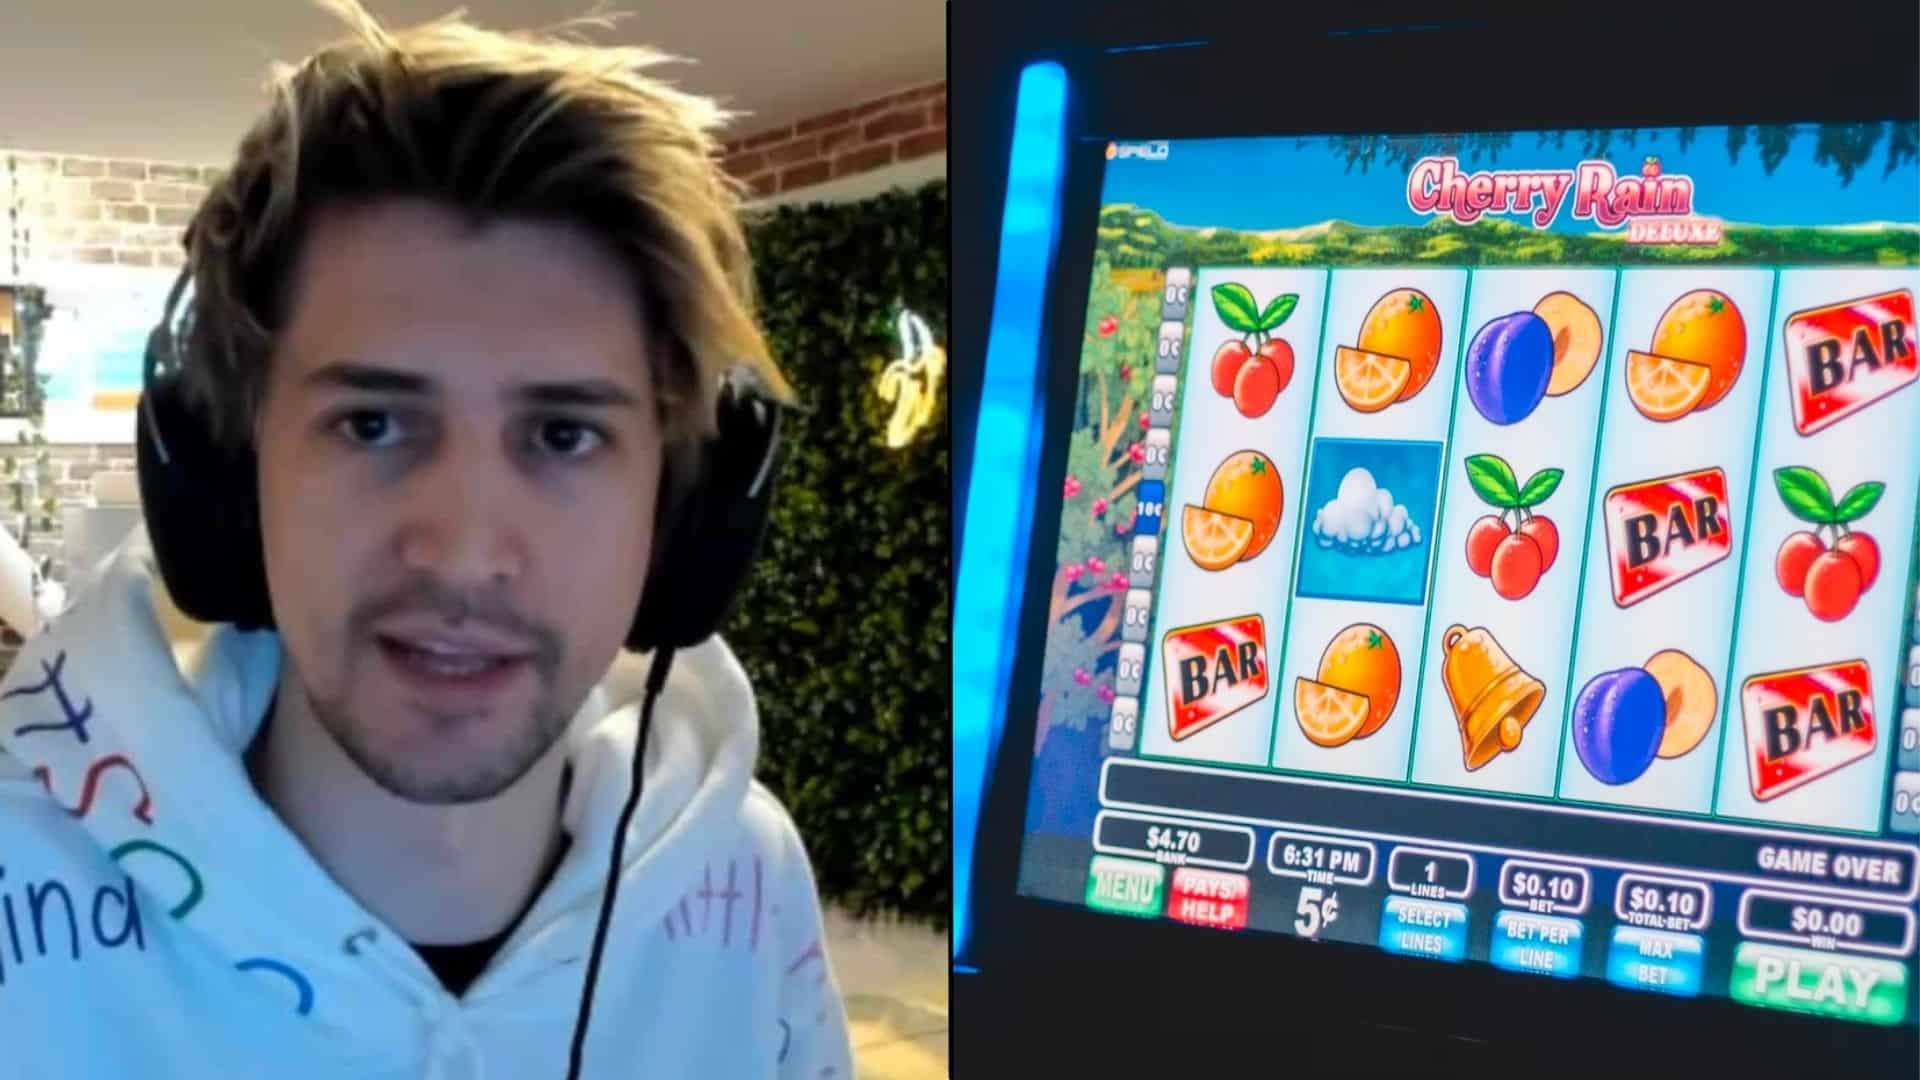 xQc sitting next to colorful slot machine with fruit symbols